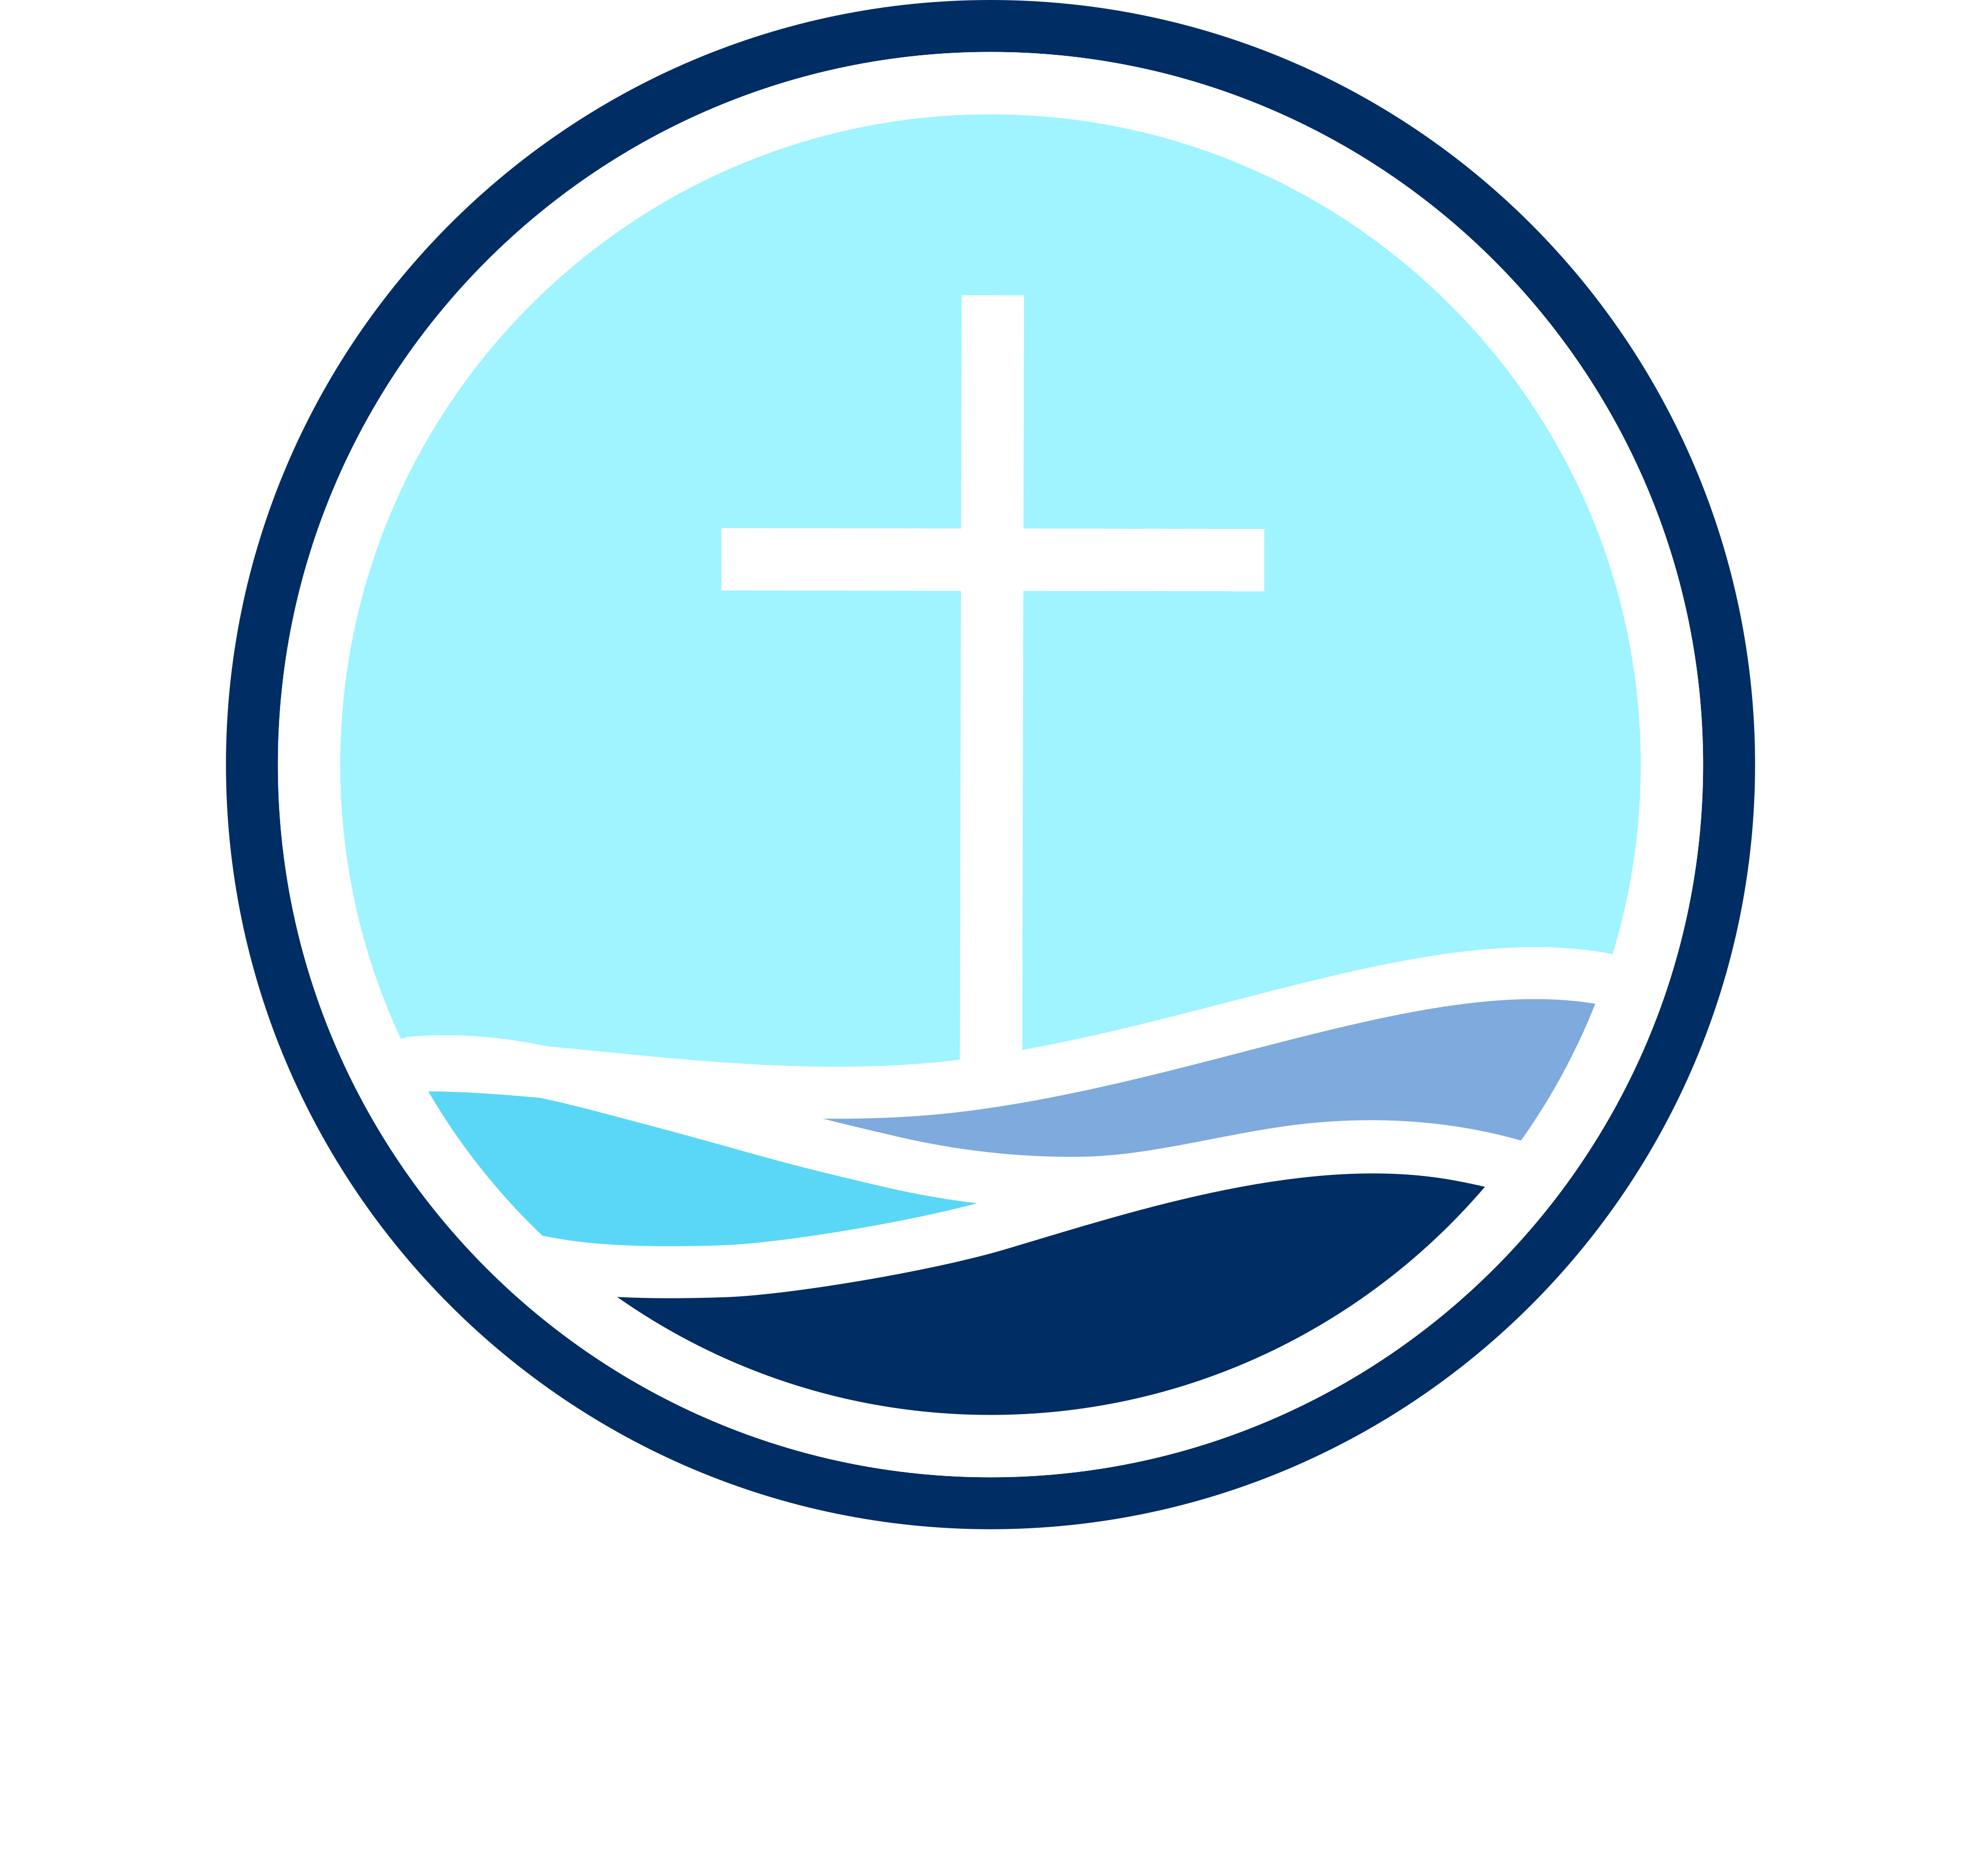 First Baptist Church of Mineral Springs